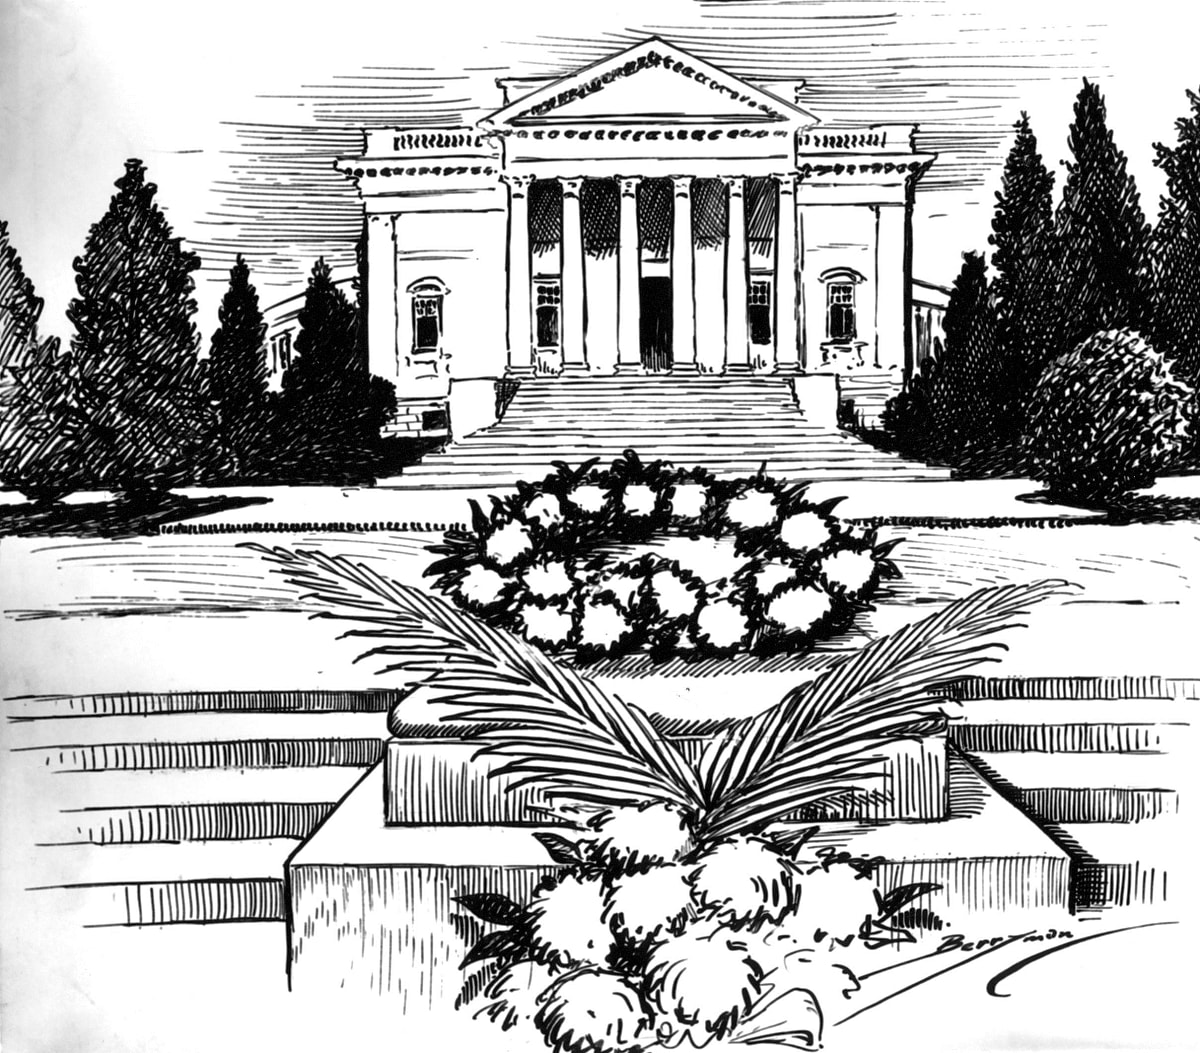 Cartoonist Clifford Berryman pays tribute to fallen veterans on this Armistice Day with the wreath-covered tomb of the unknown soldier at Arlington National Cemetery, OTD in 1927